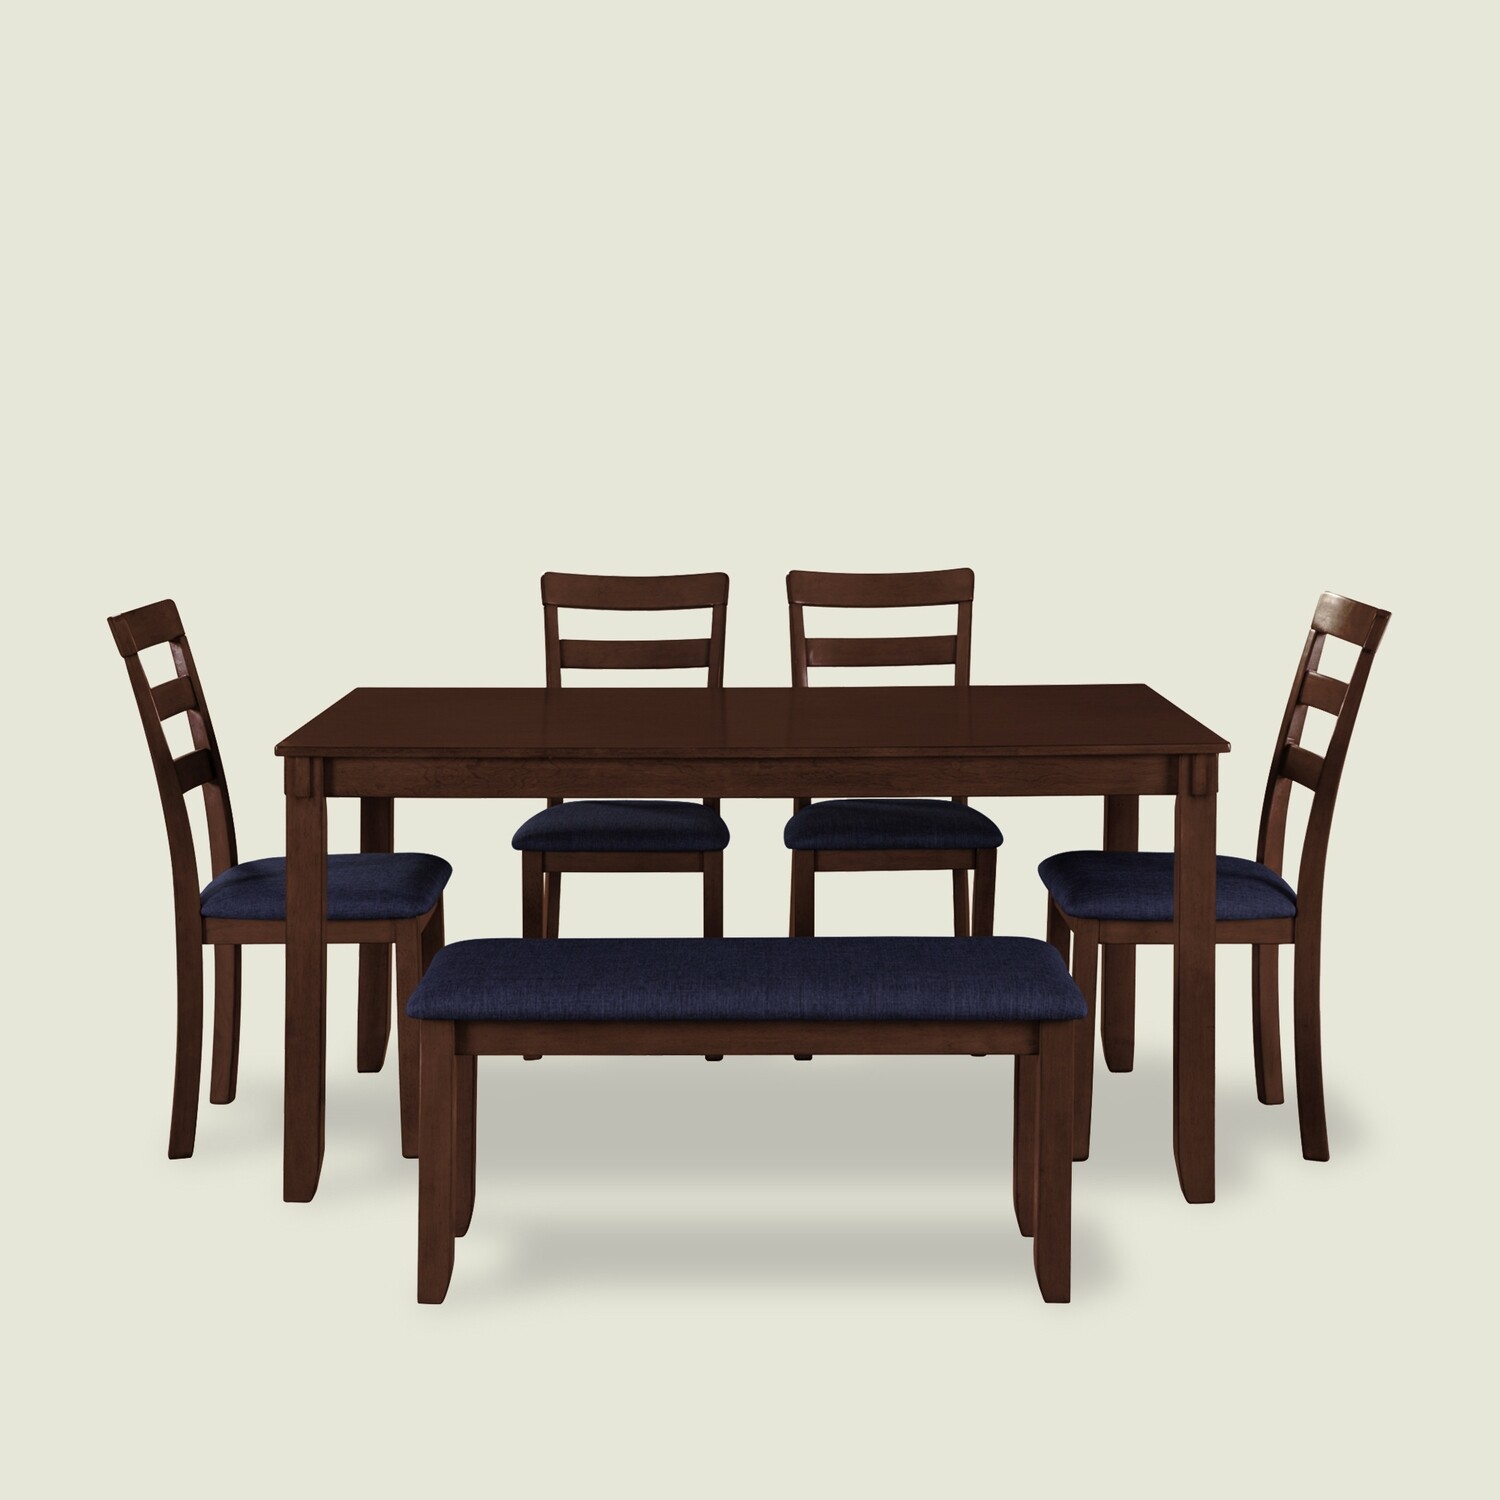 Hale Dining Table Set - 4, 6 & 8 Seater/All Sizes - With Bench